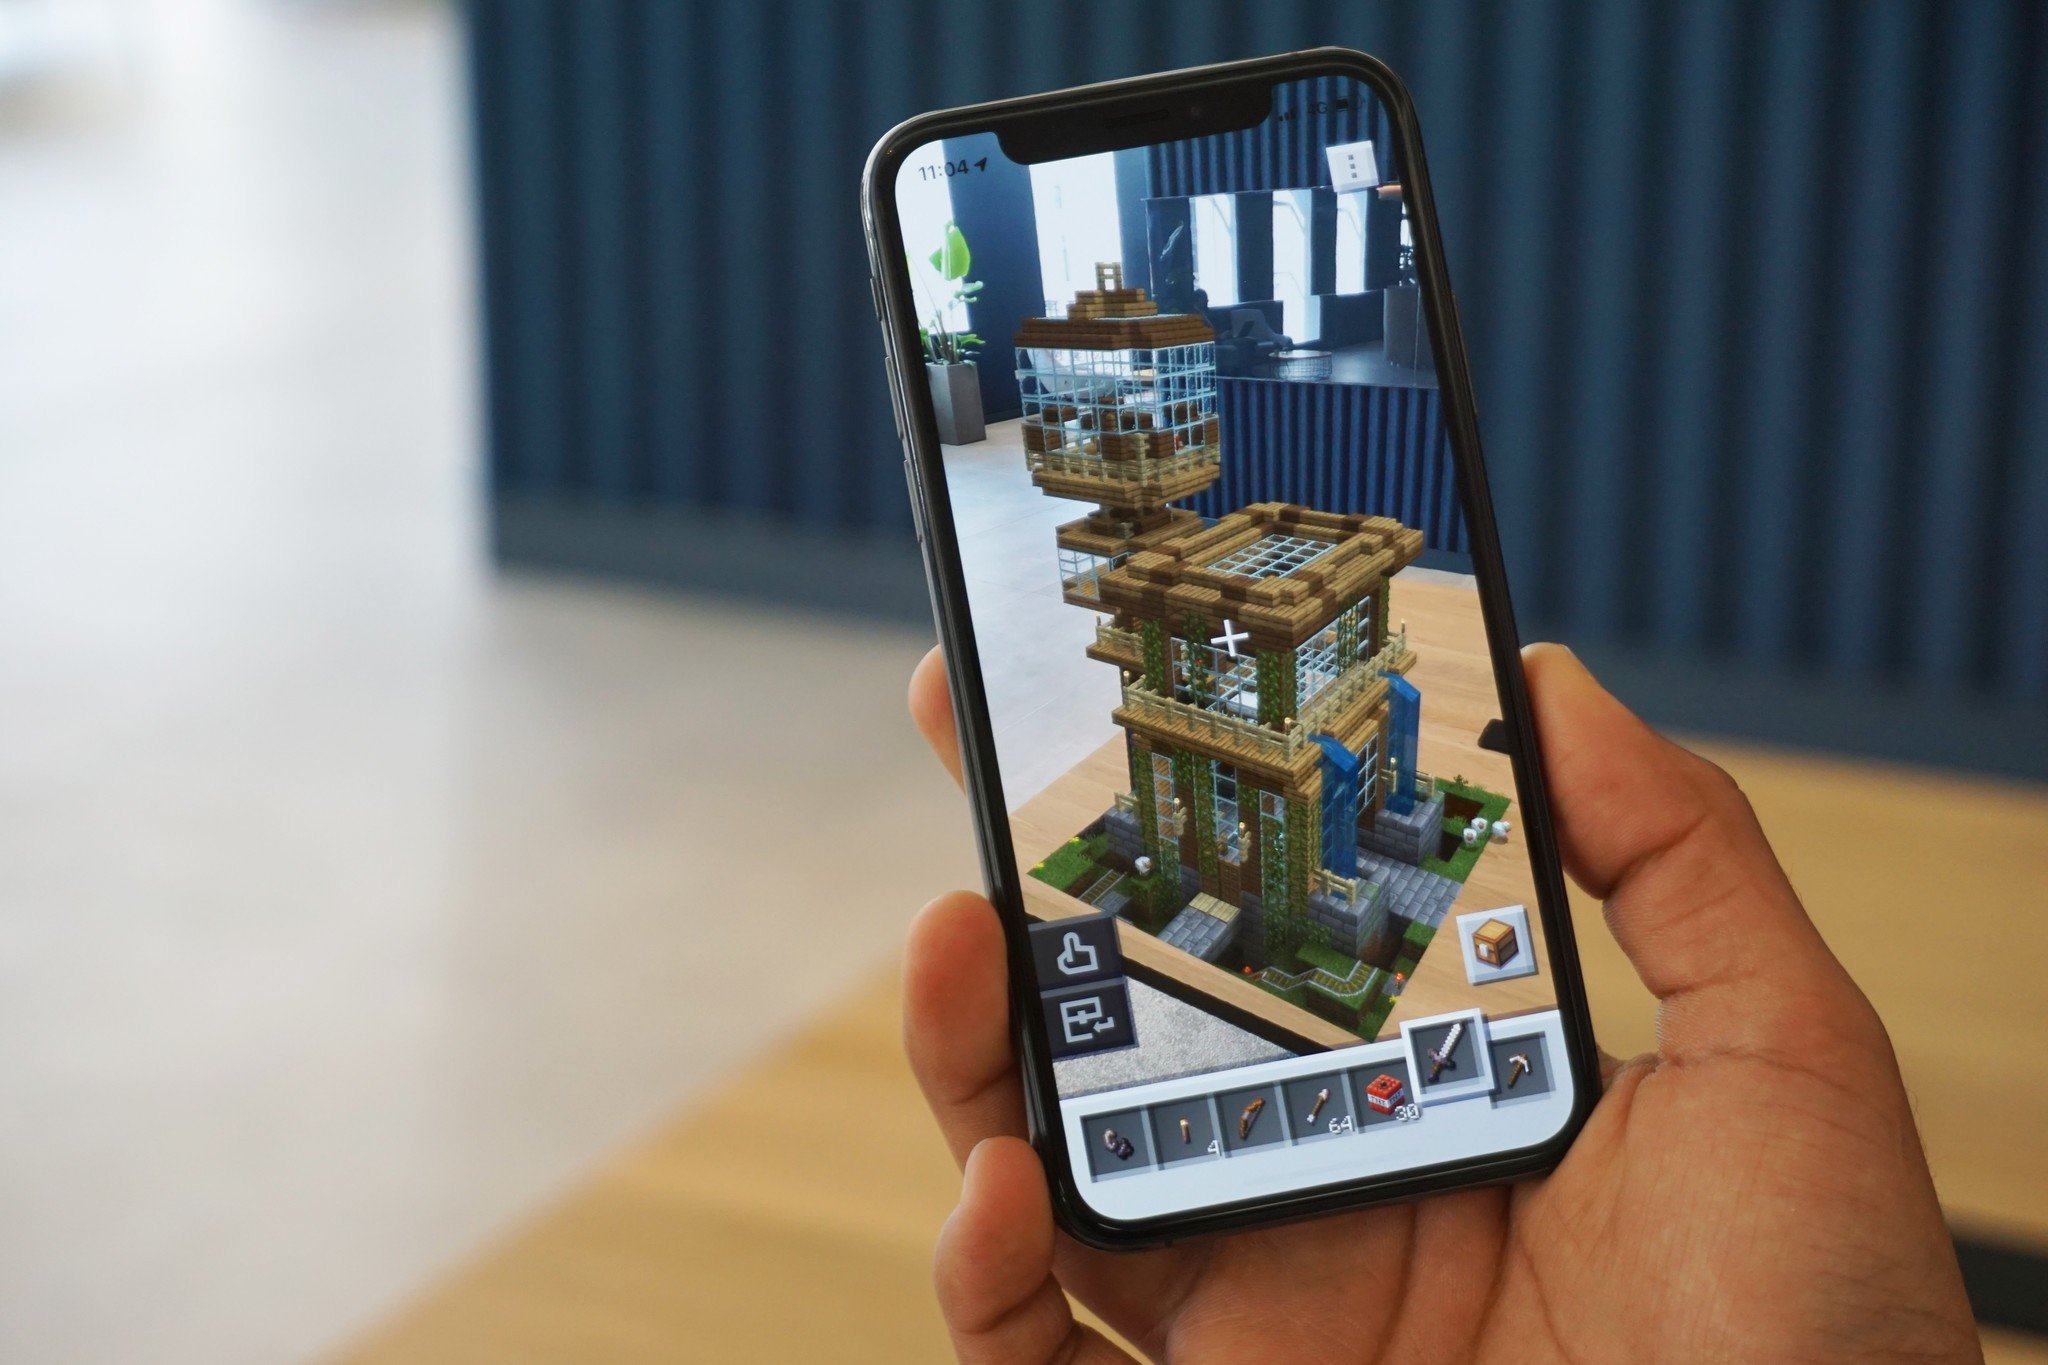 Global Launch of Minecraft Earth Early Access on Android and iOS